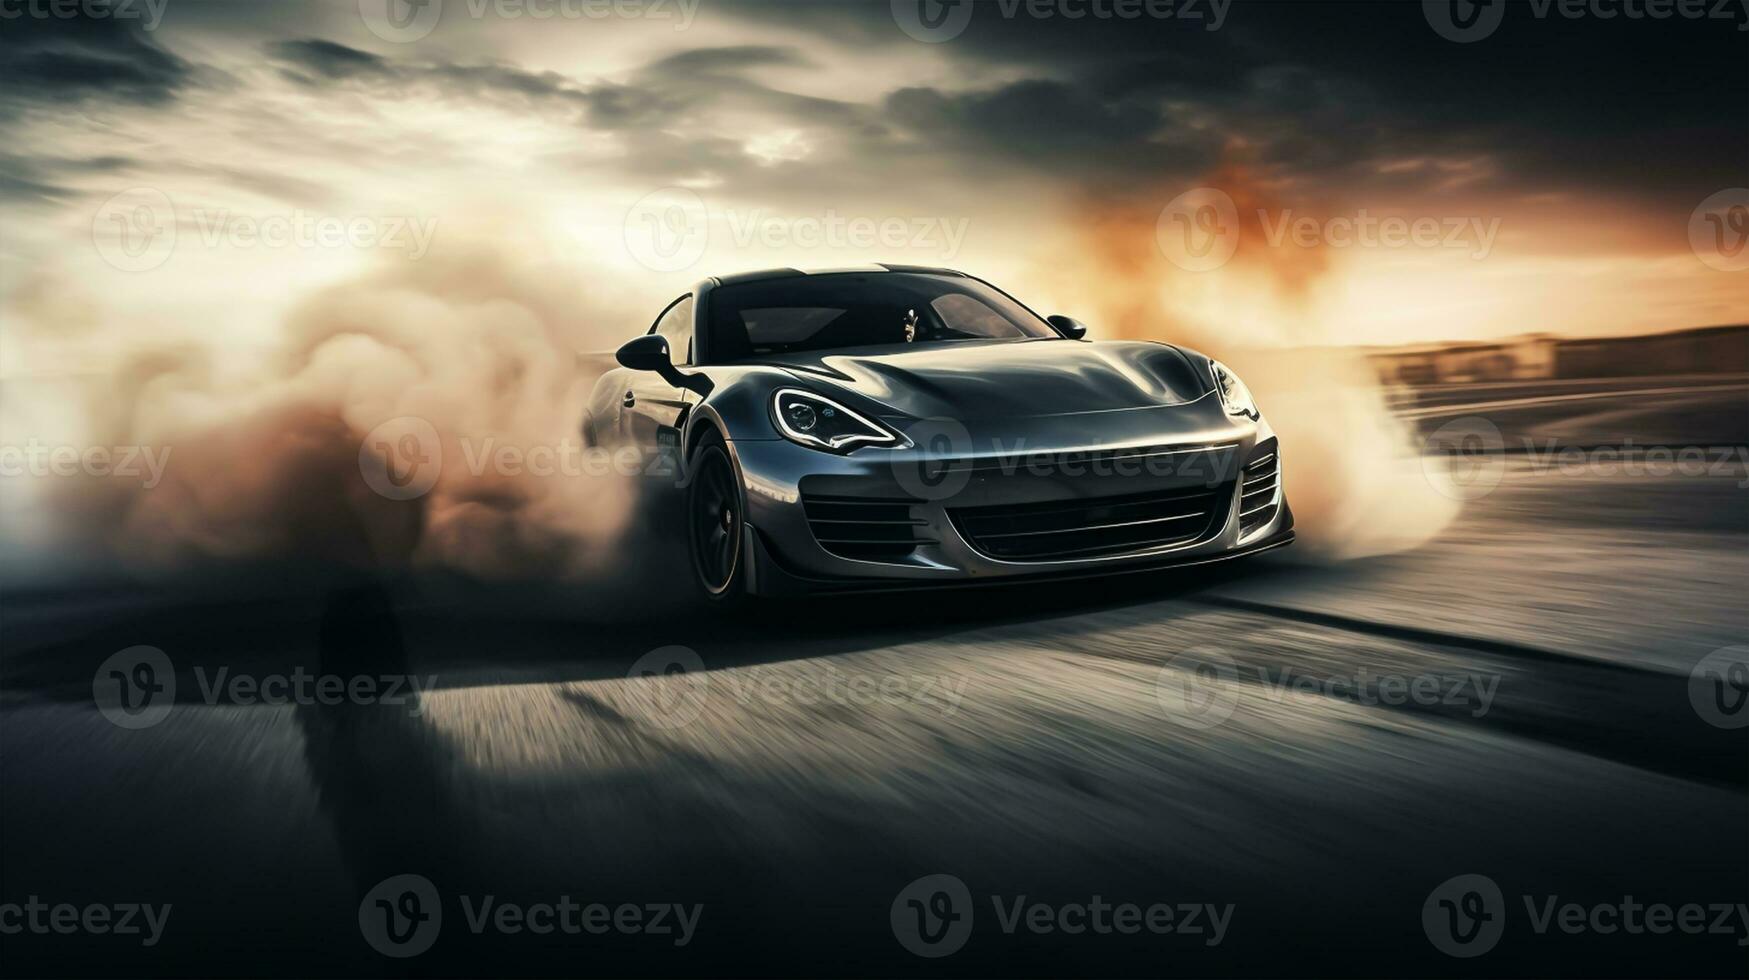 sport car on the race track, extreme car race concept photo